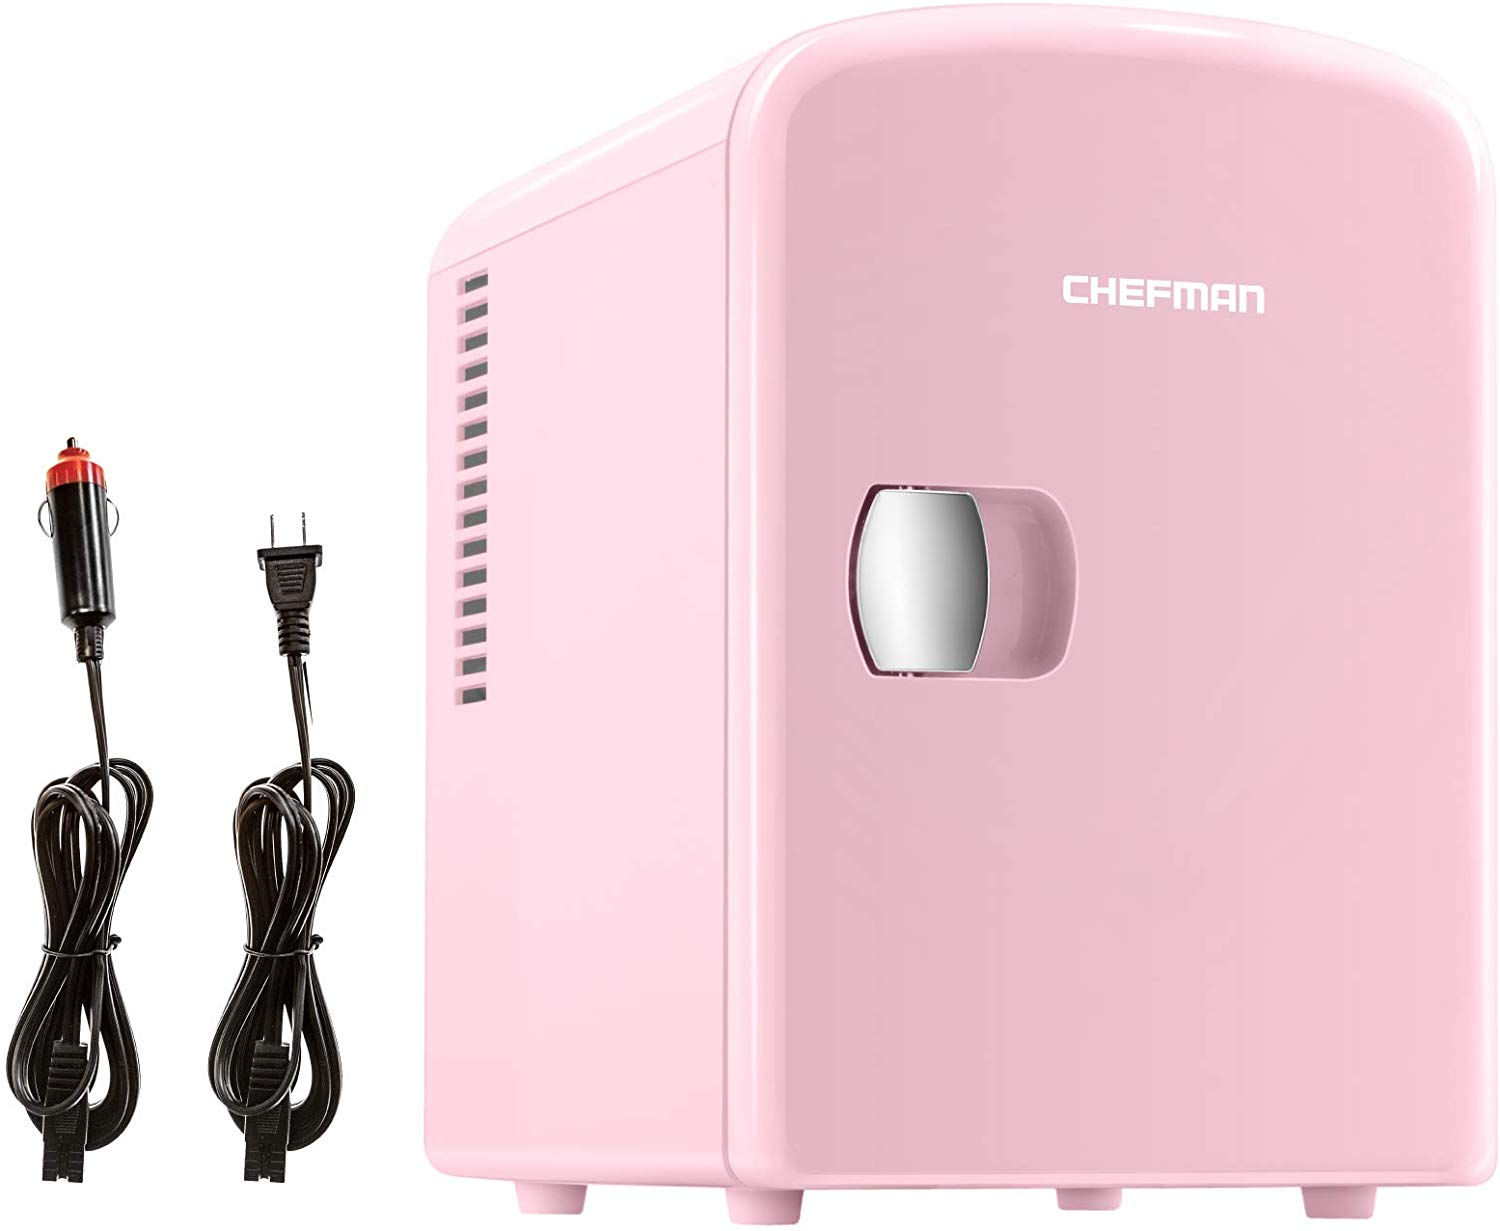 Chefman Portable 4L Mini Fridge w/ Heating and Cooling - Pink, New - image 4 of 5